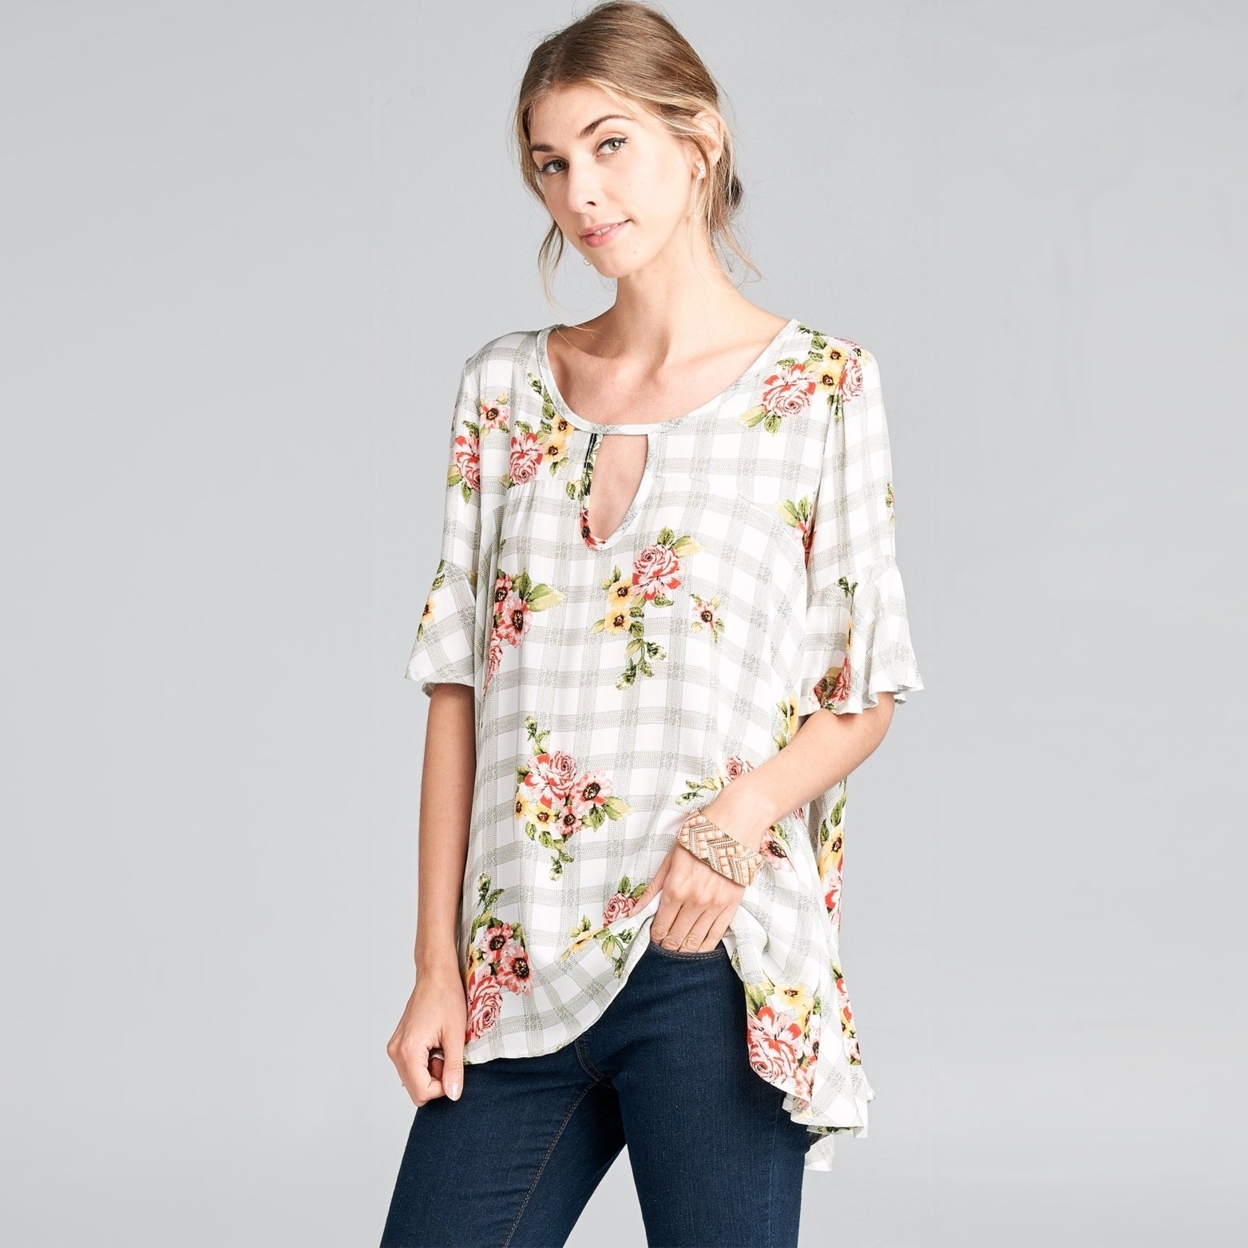 Floral Plaid Swing Top - Ivory, Small (2-4)